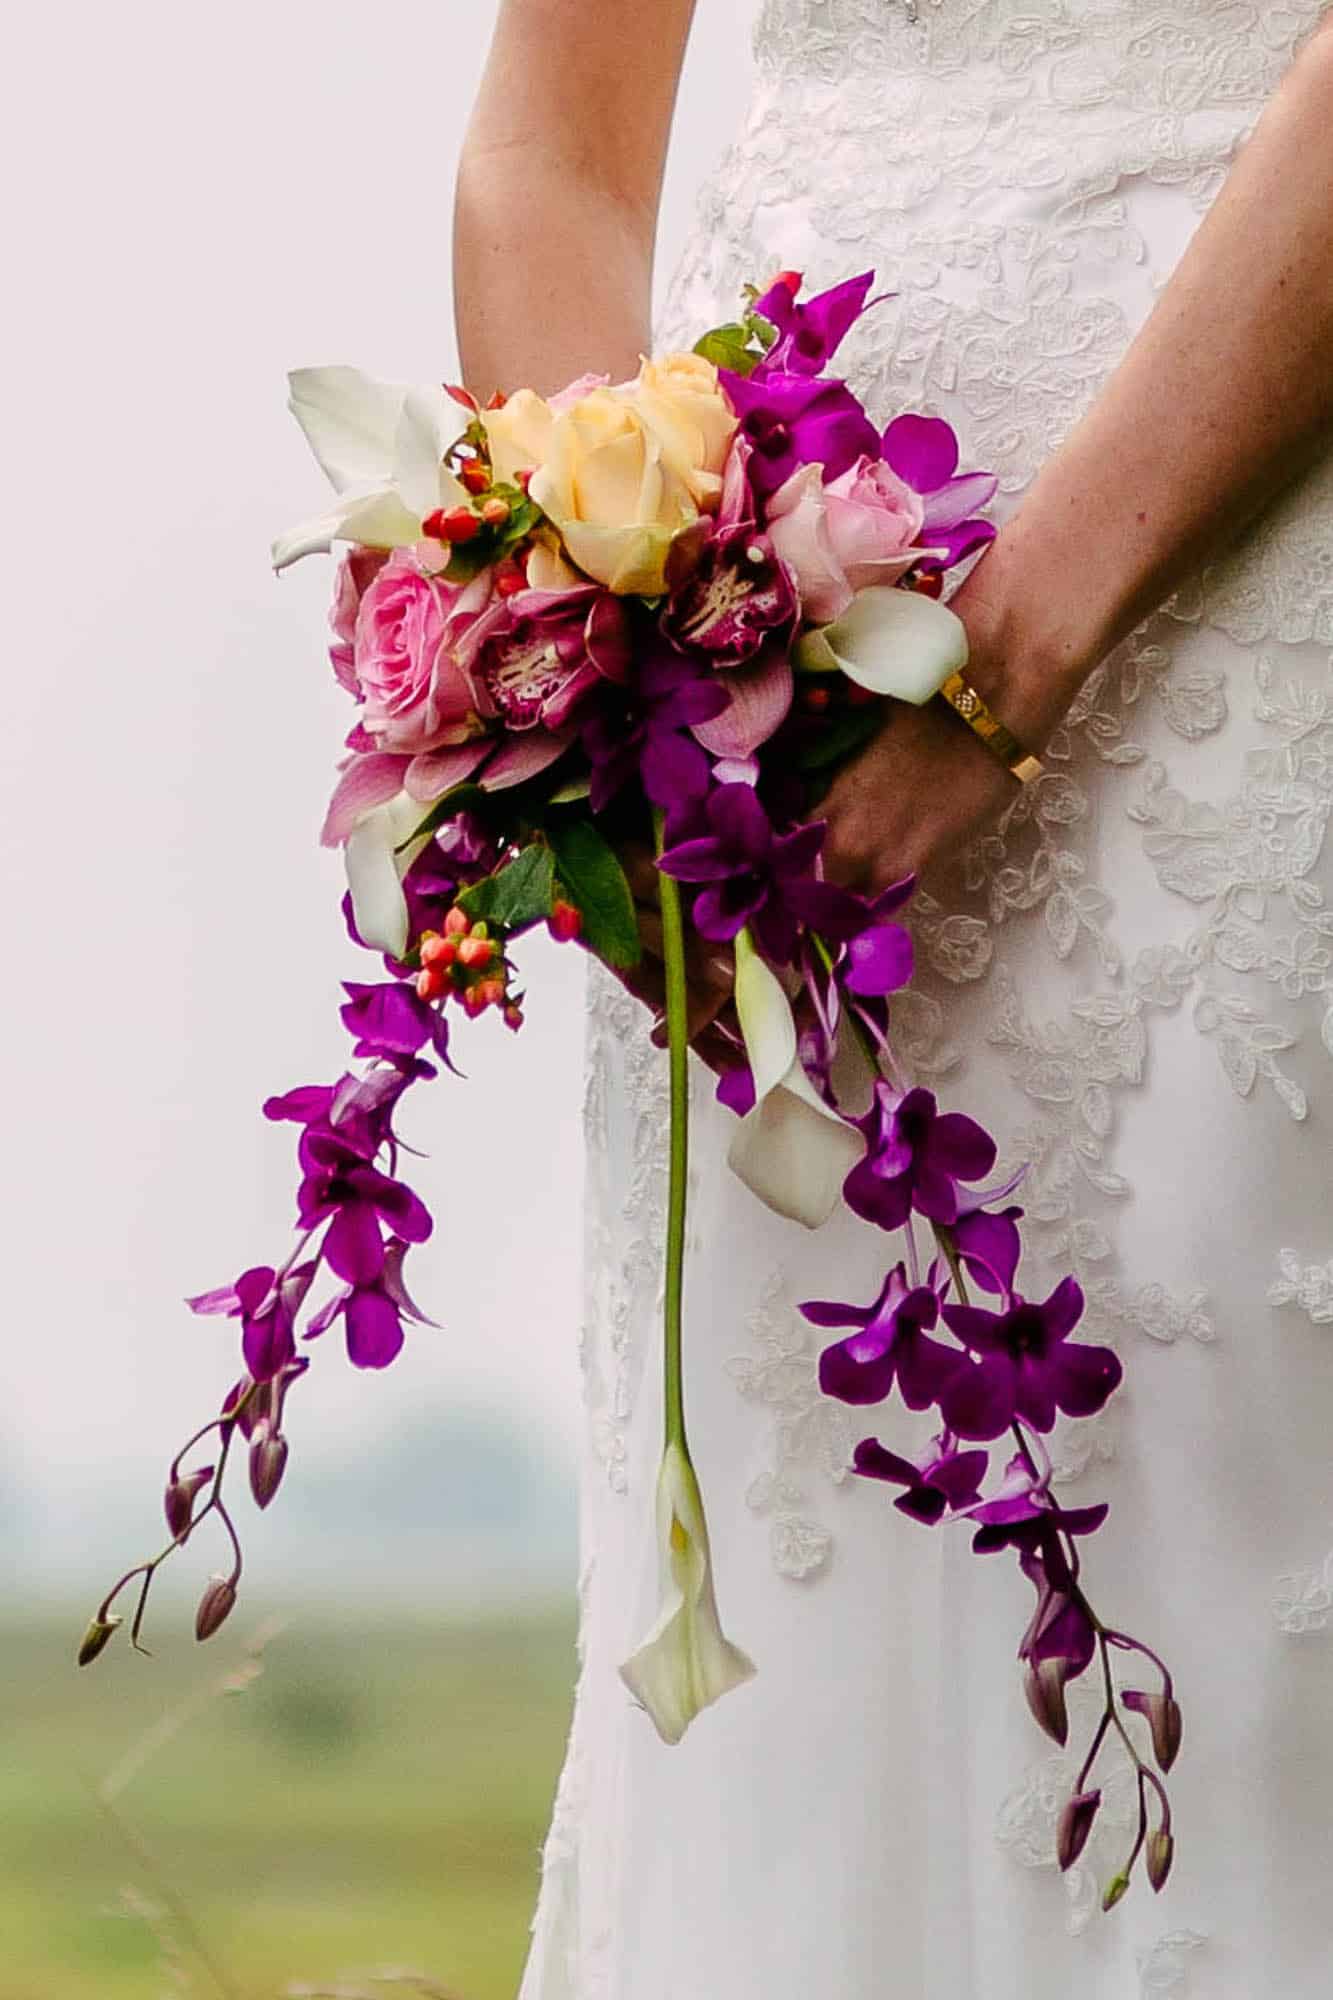 A bride loves a wedding bouquet of orchids and purple flowers large.